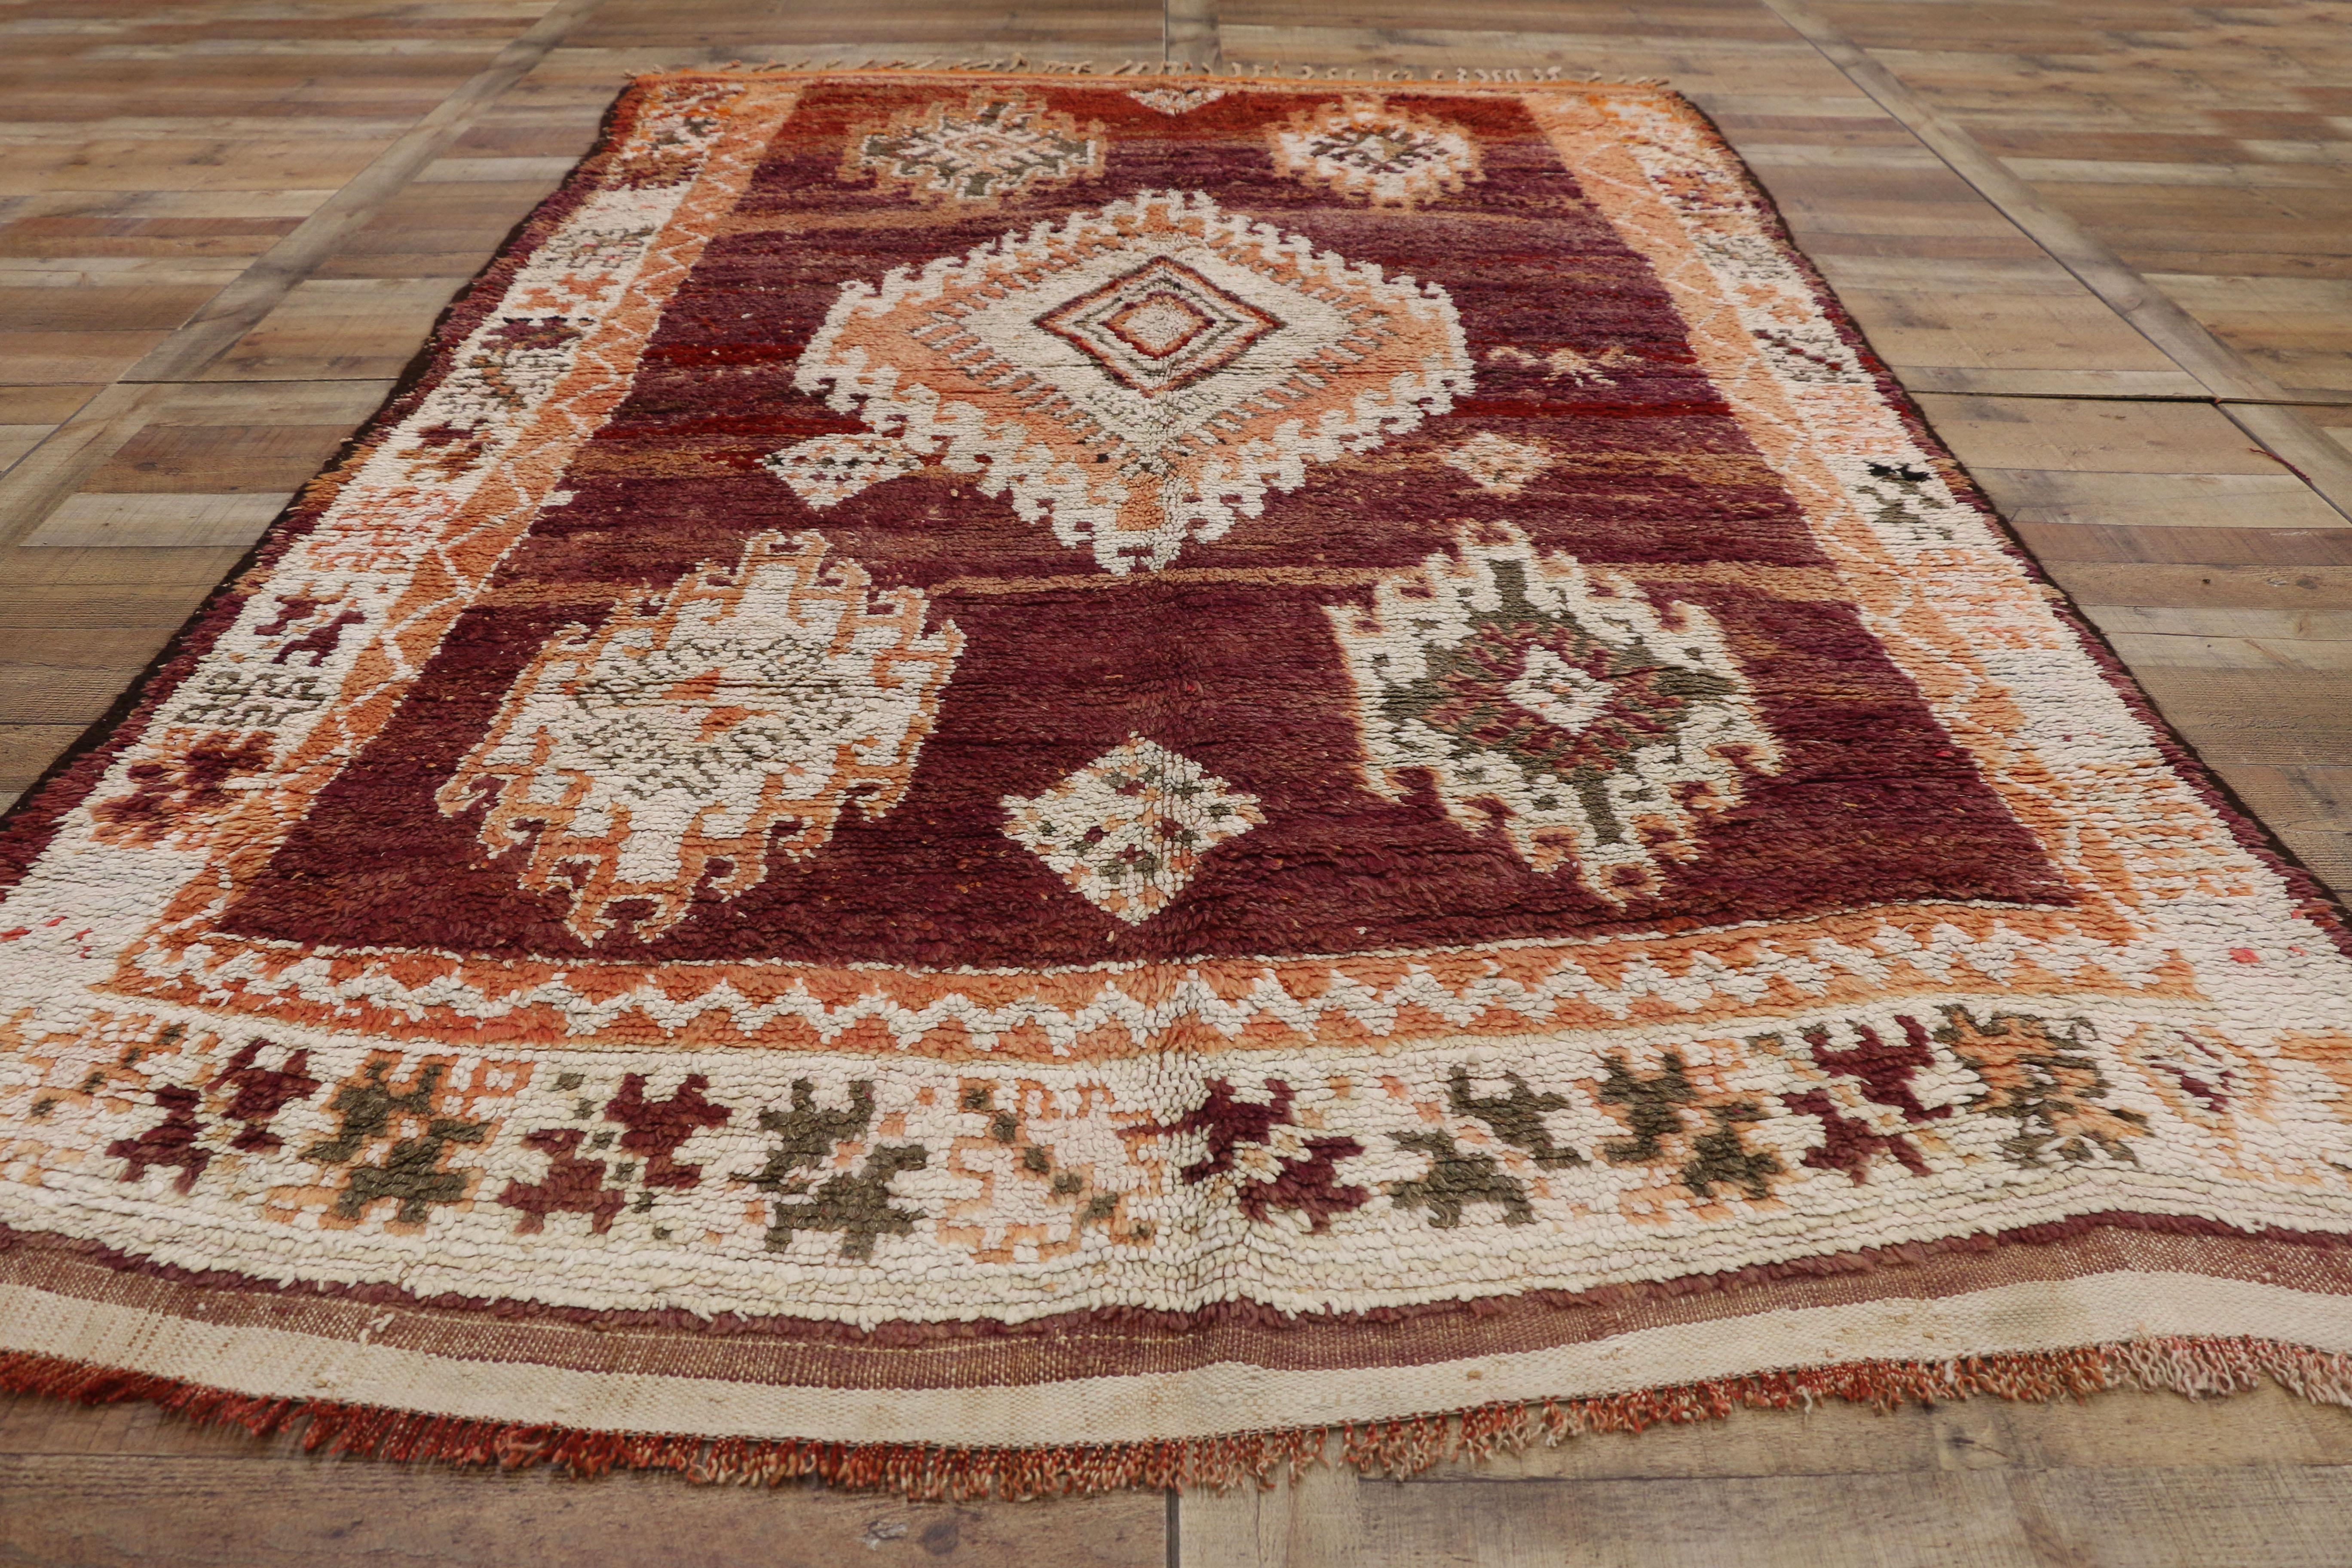 Vintage Berber Moroccan Rug with Bohemian Style 1